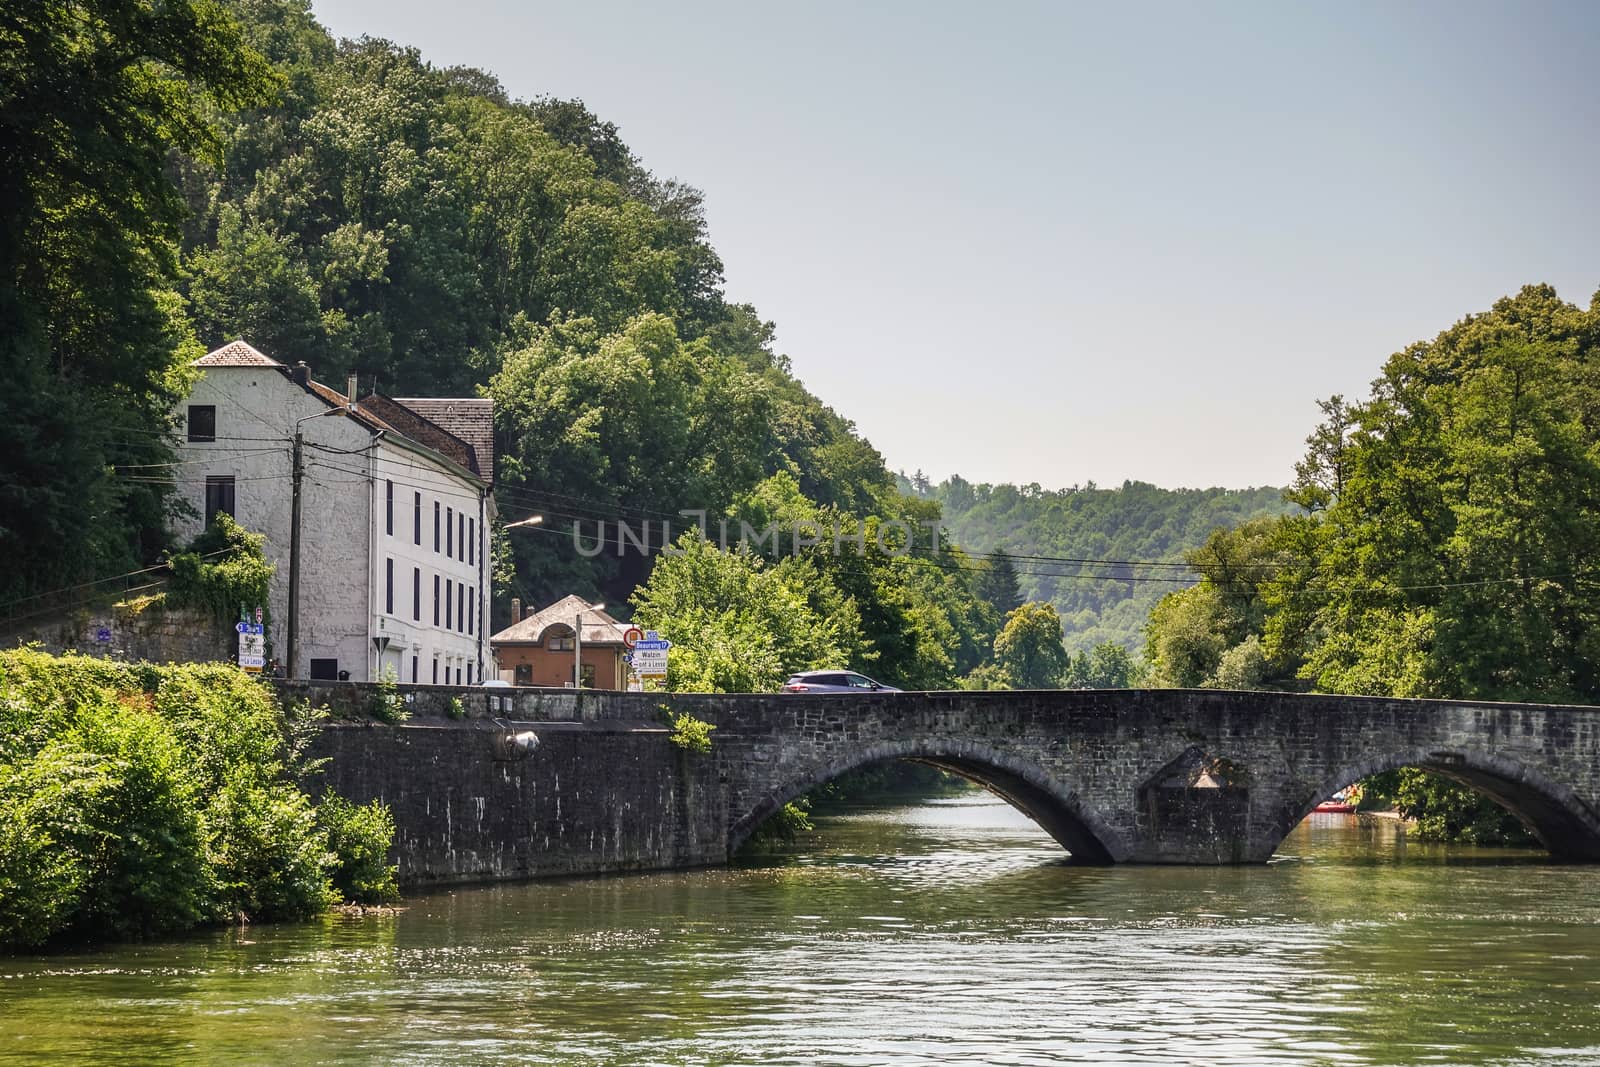 Dinant, Belgium - June 26, 2019: Old roman bridge over greenish Lesse River. Saint Anne Church tower captured in green foliage on the right. White building on the left under light blue sky.